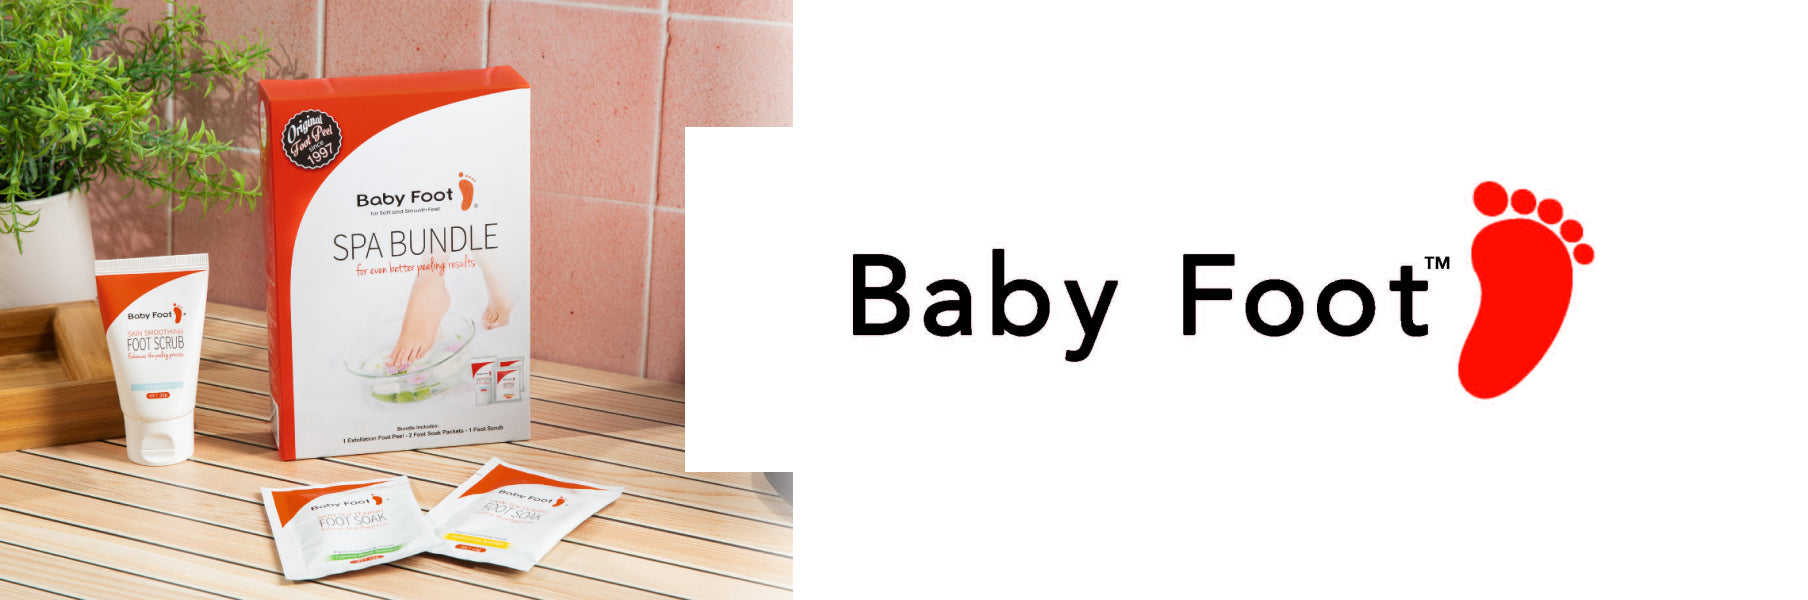 The Baby Foot Spa Bundle, on a wooden slat surface, against a pink tile wall, with the Baby Foot logo on a white background next to it.